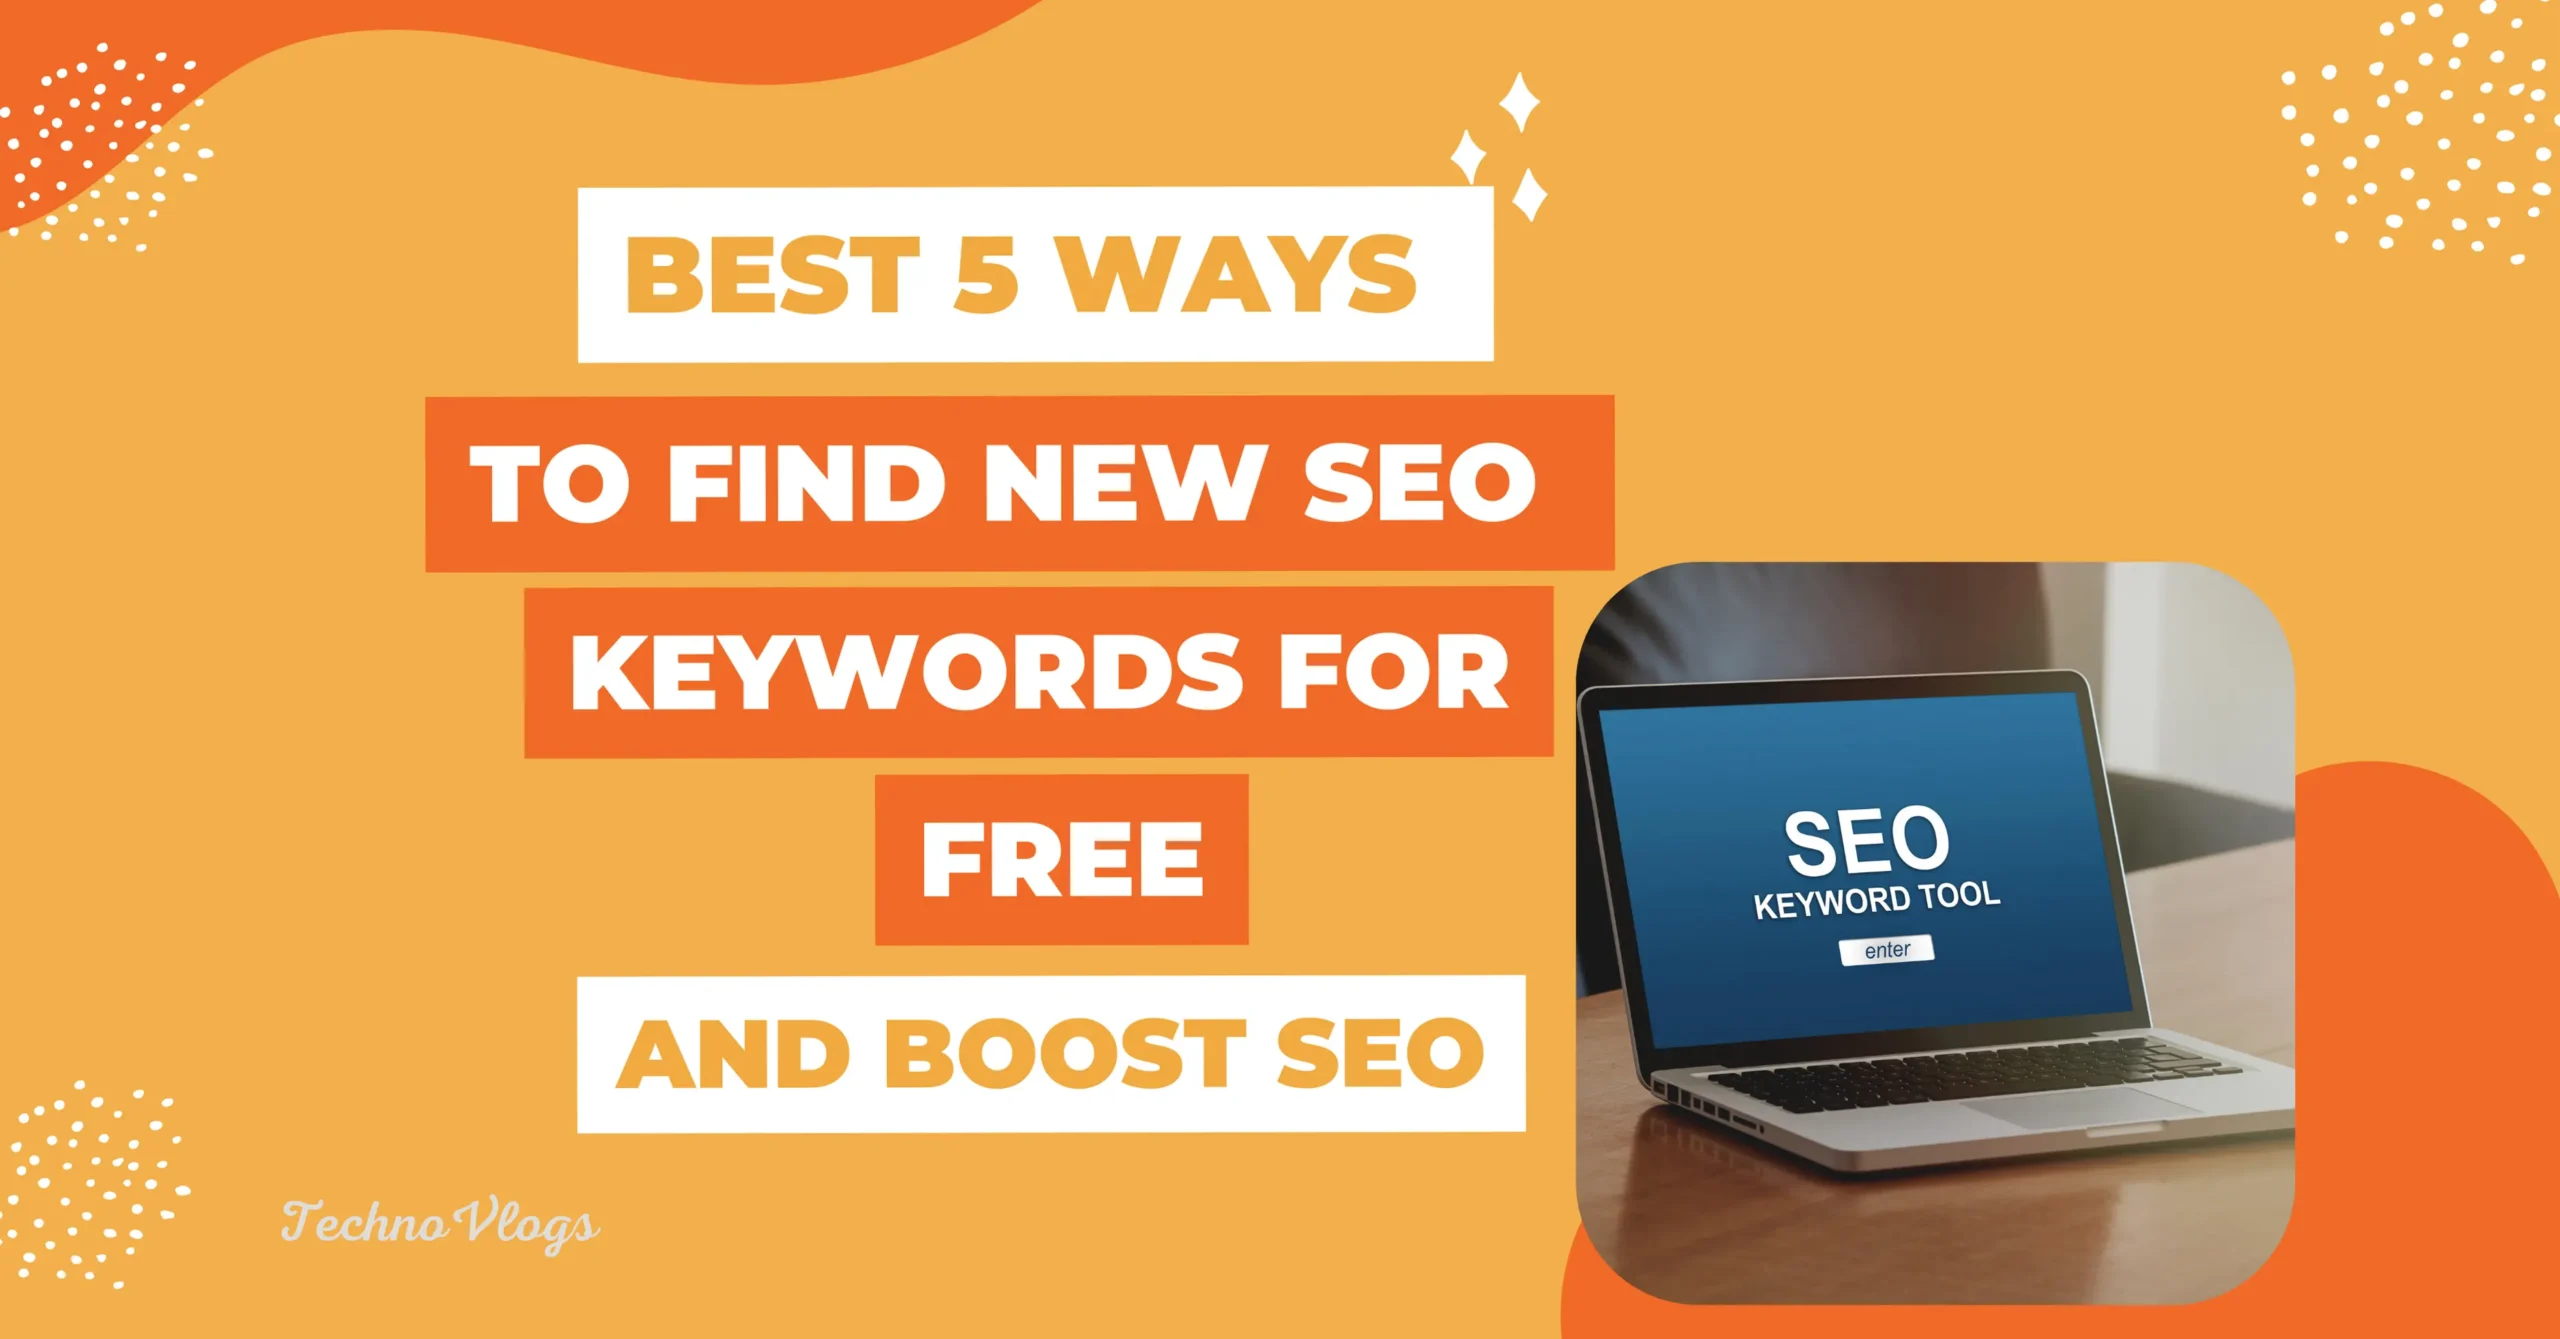 free keyword research tool | best way to find keyword research tools | keywords google | TechnoVlogs